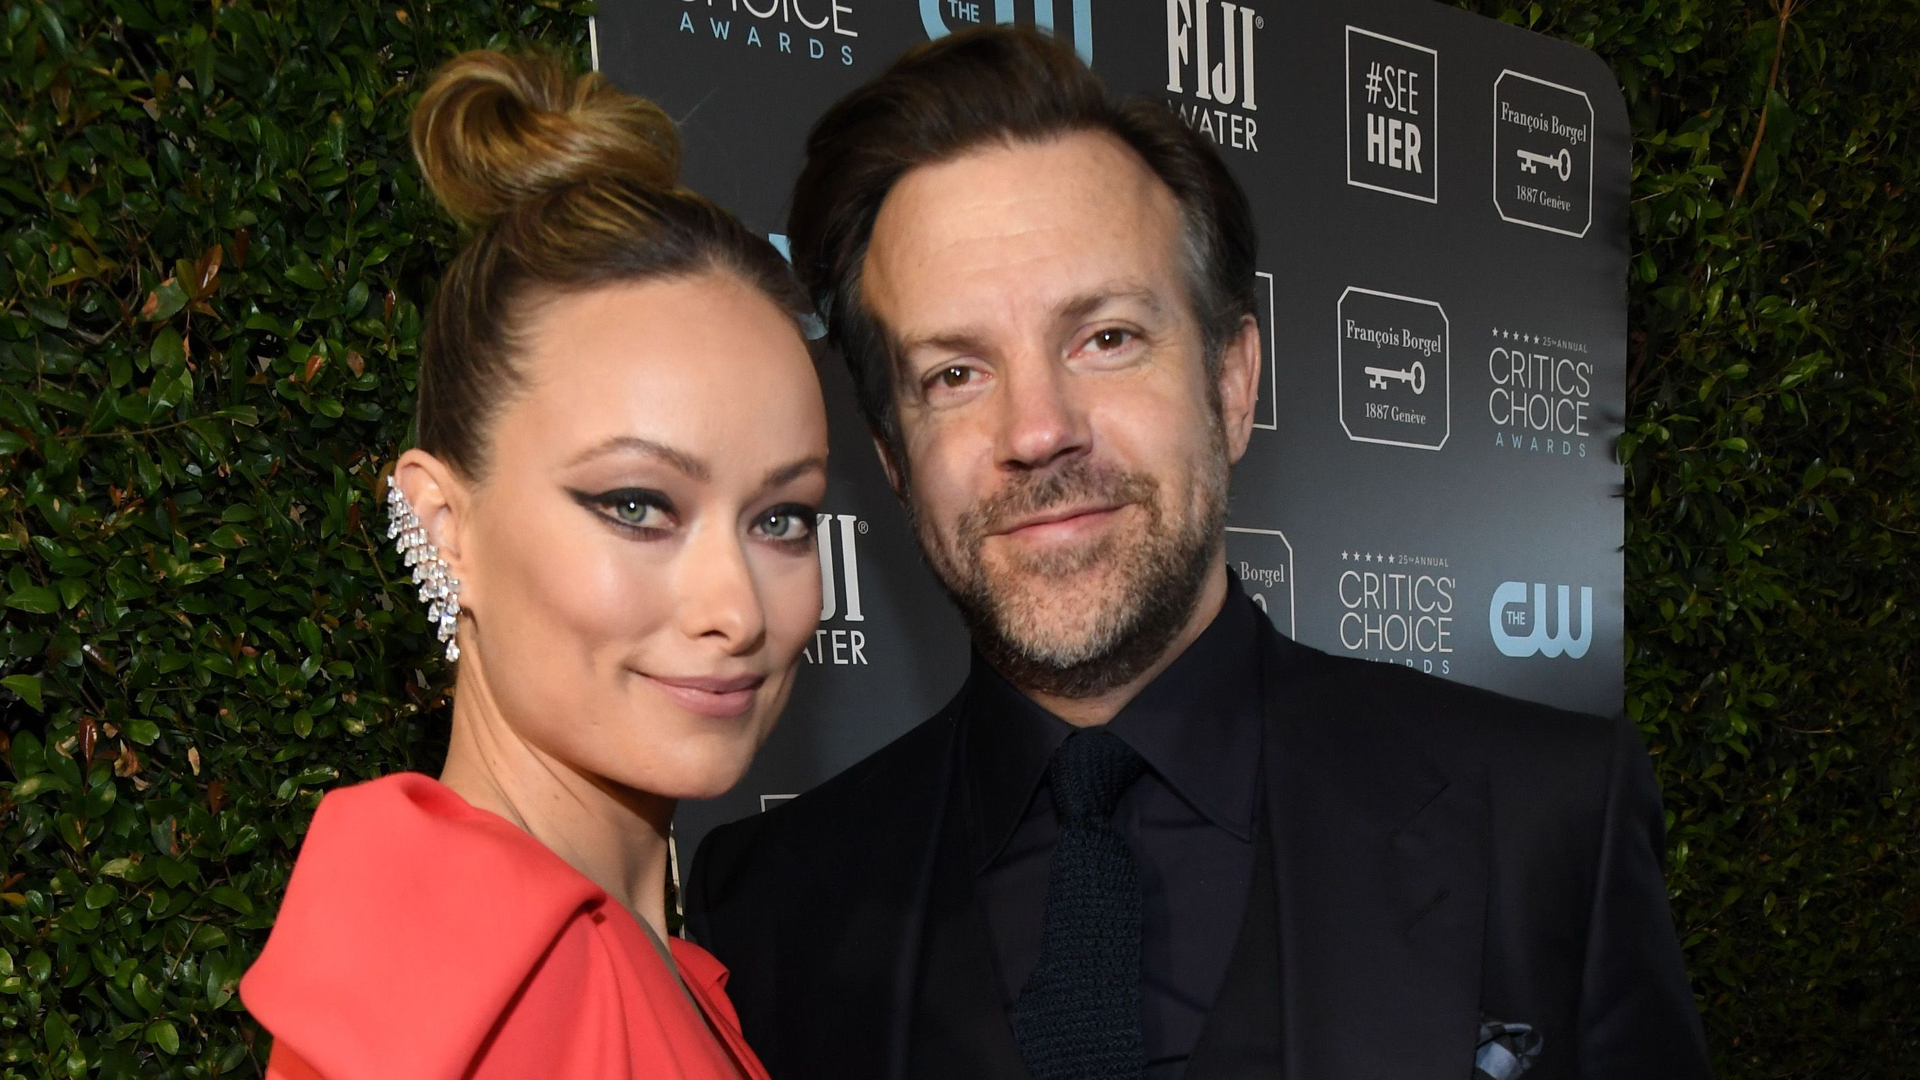 Olivia Wilde and Jason Sudeikis are pictured at a critics event